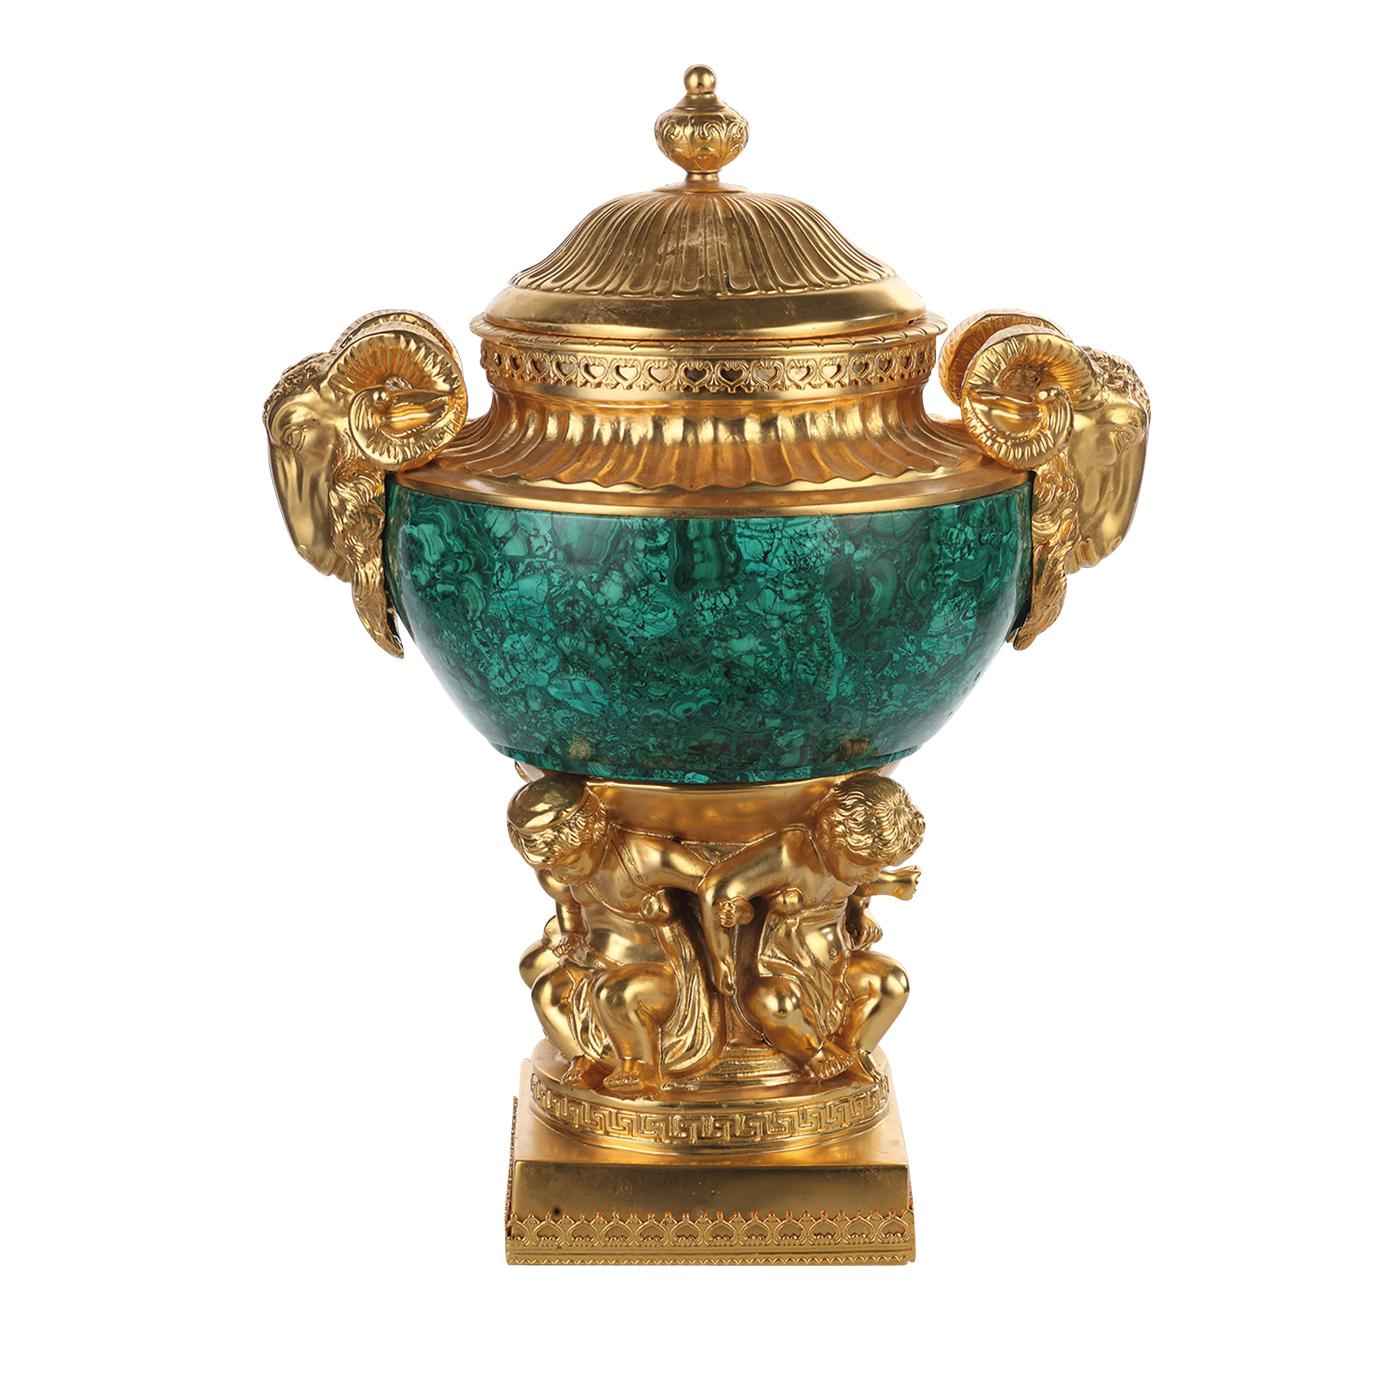 This magnificent vase, inspired by the baroque objects of the 17th and 18th century, features a body in malachite marble, whose vivid shade of green strikingly contrasts with the bronze base, decorations, and lid, and their gold patina. Typical